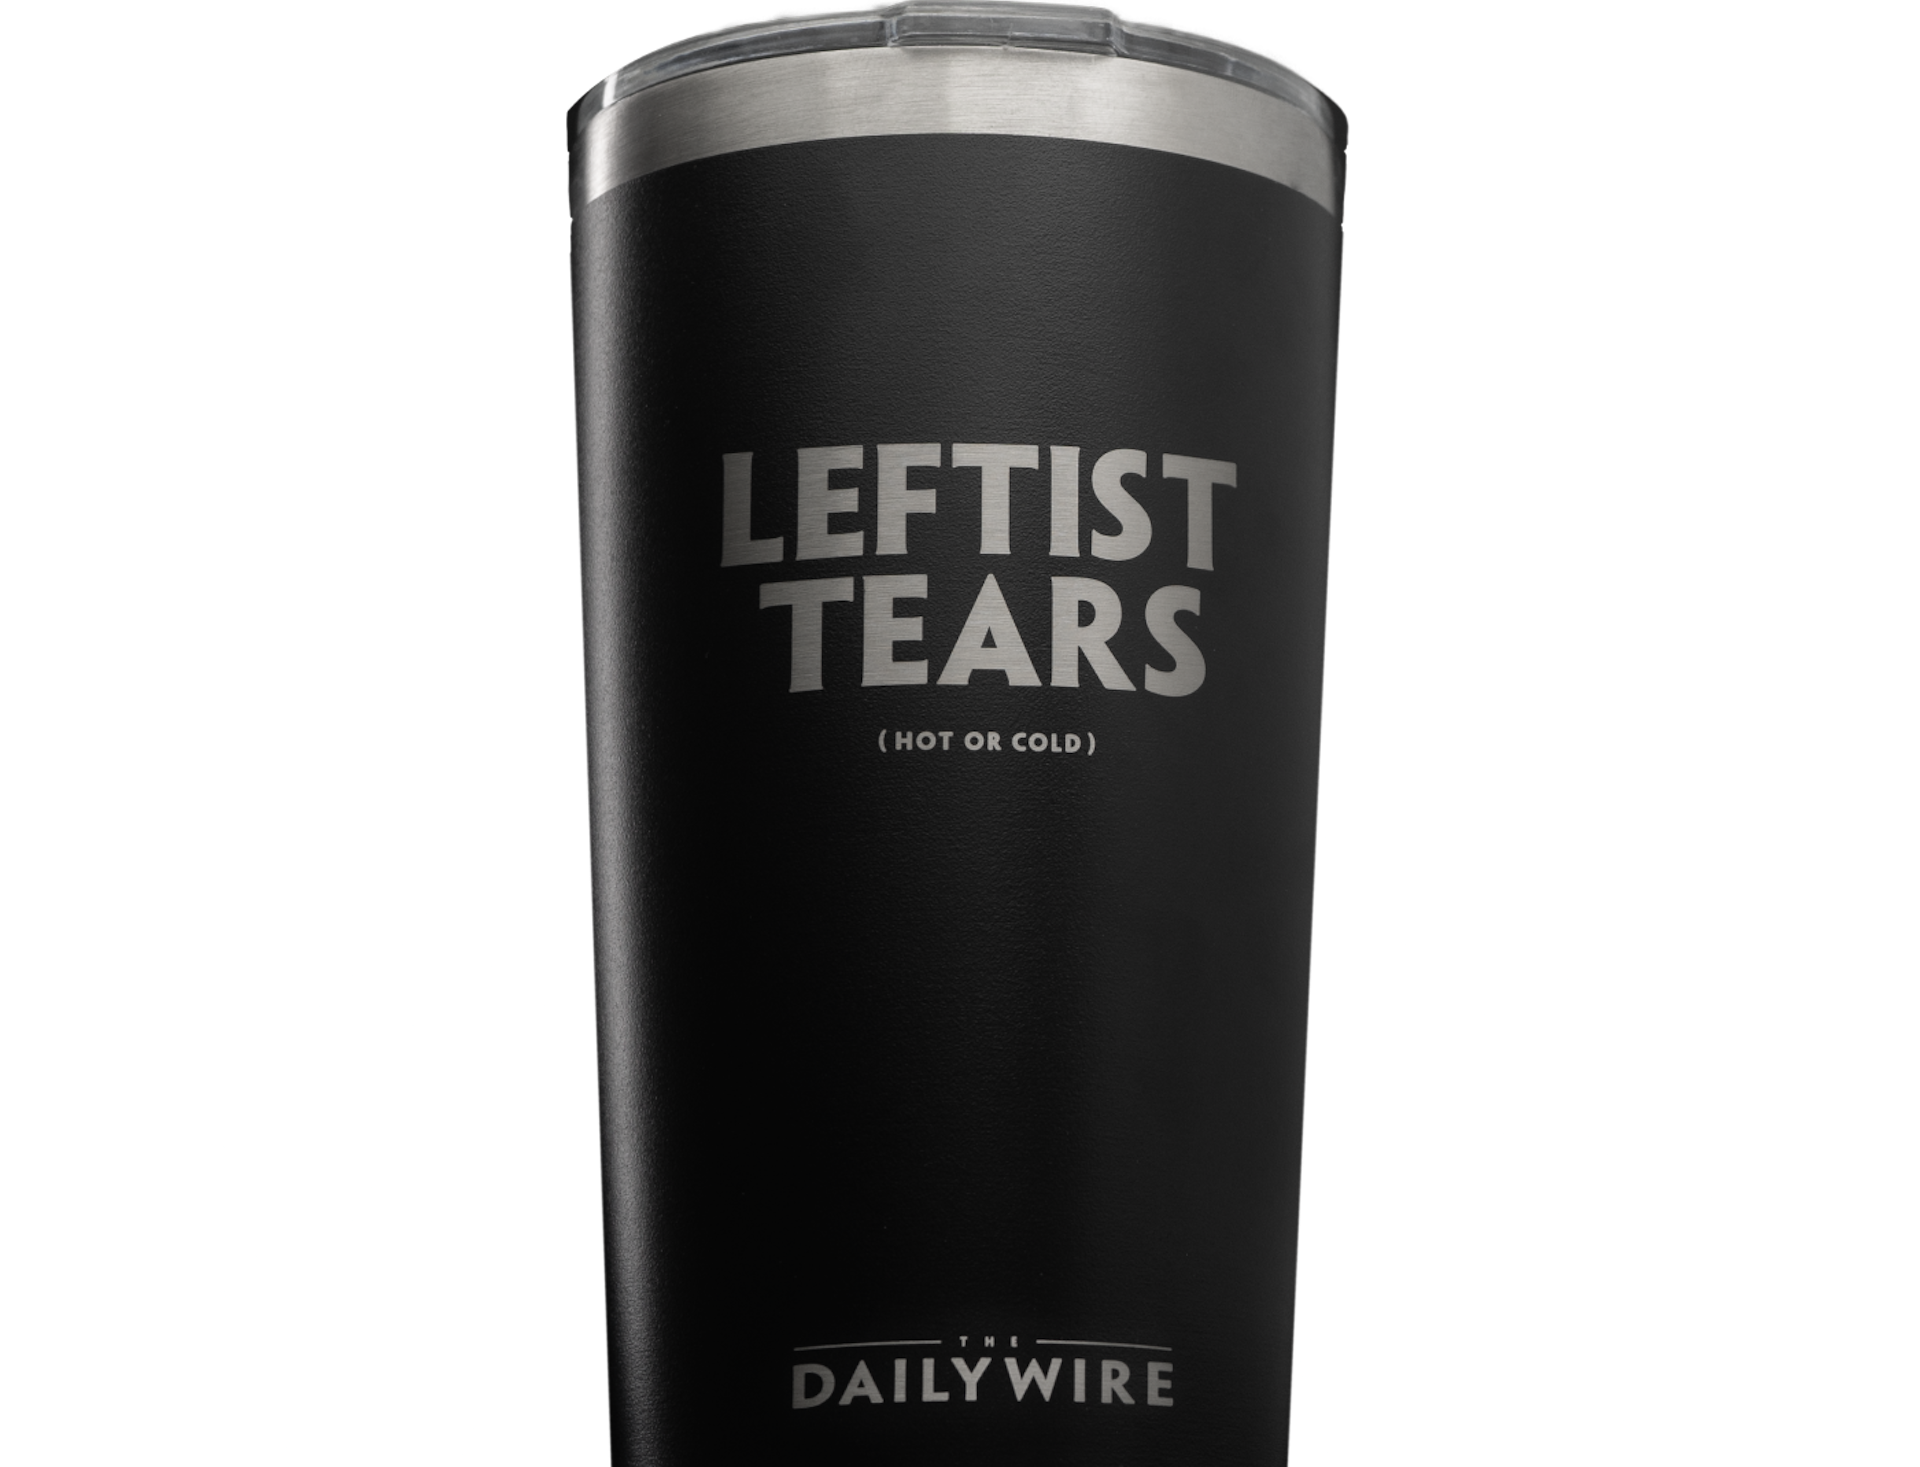 Get our iconic Leftist Tears tumbler.